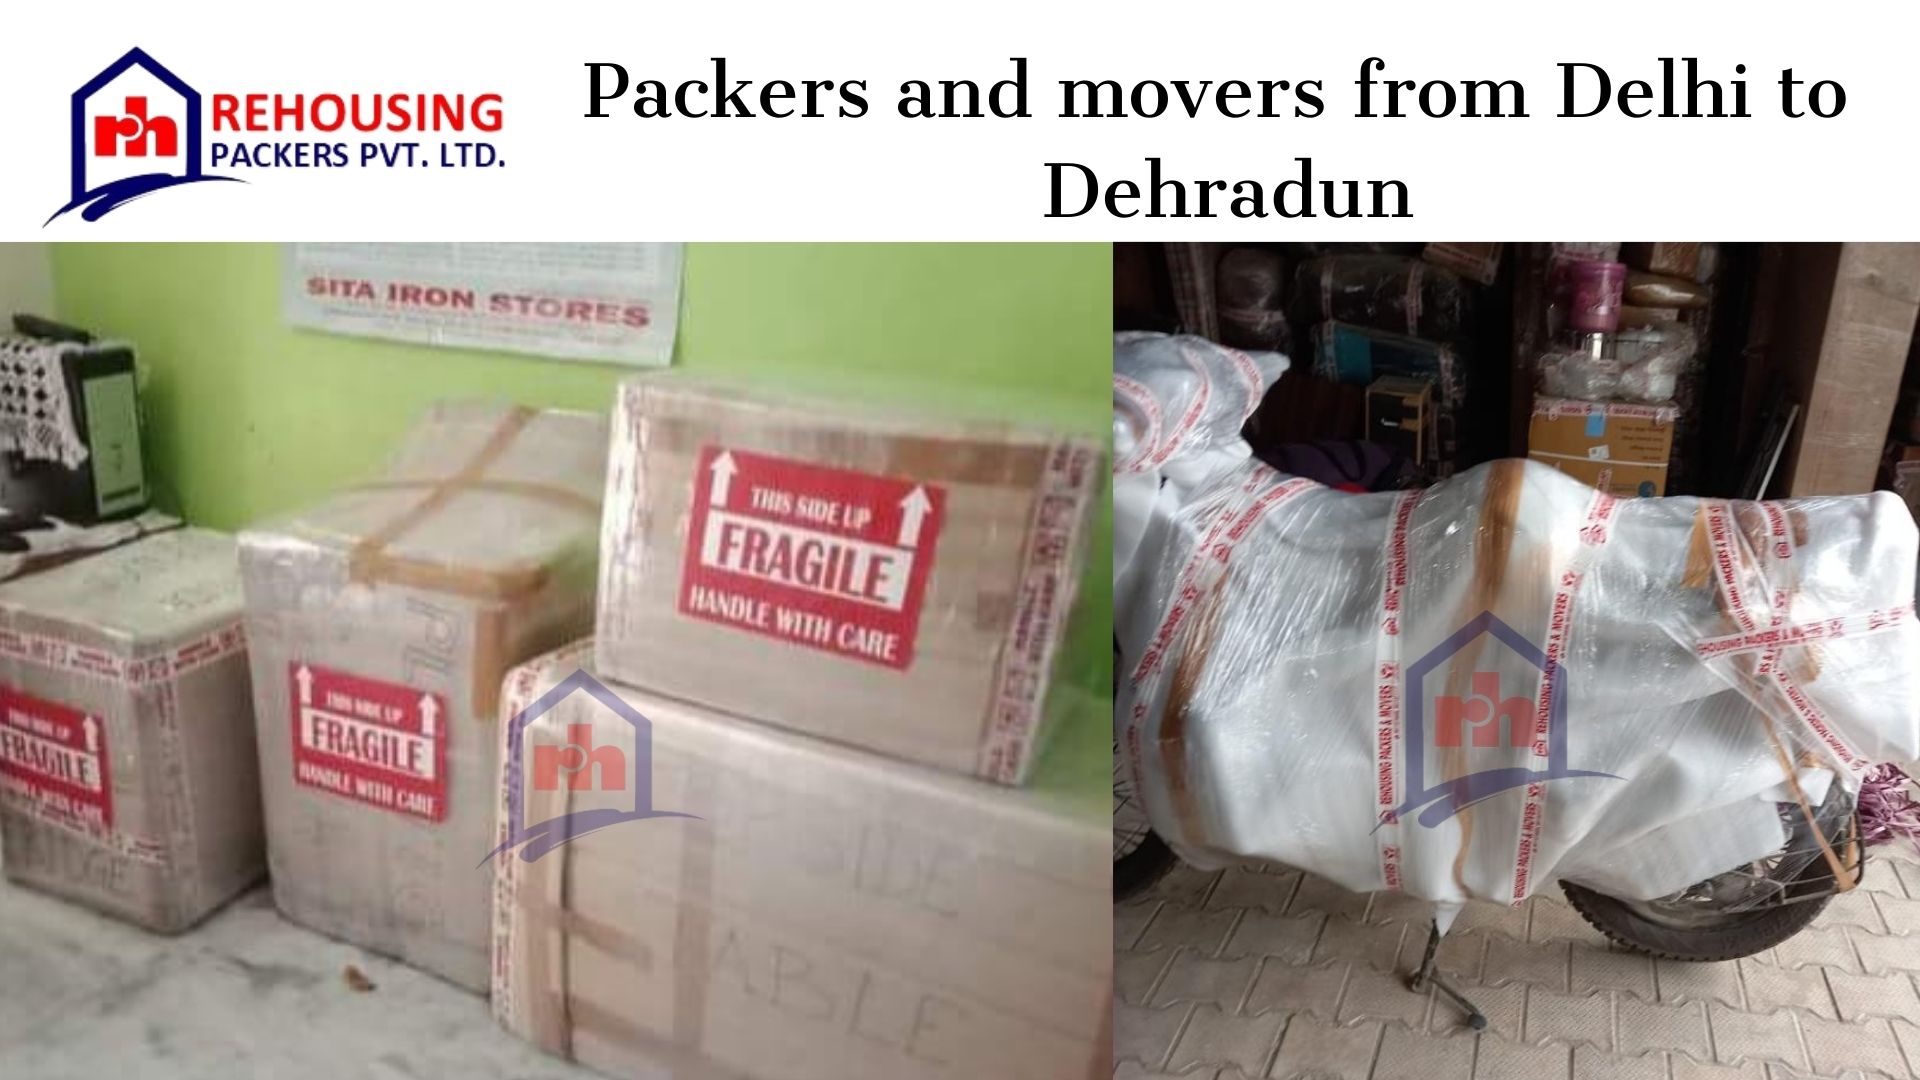 Packers and Movers Delhi to Dehradun | Simplify Your Move